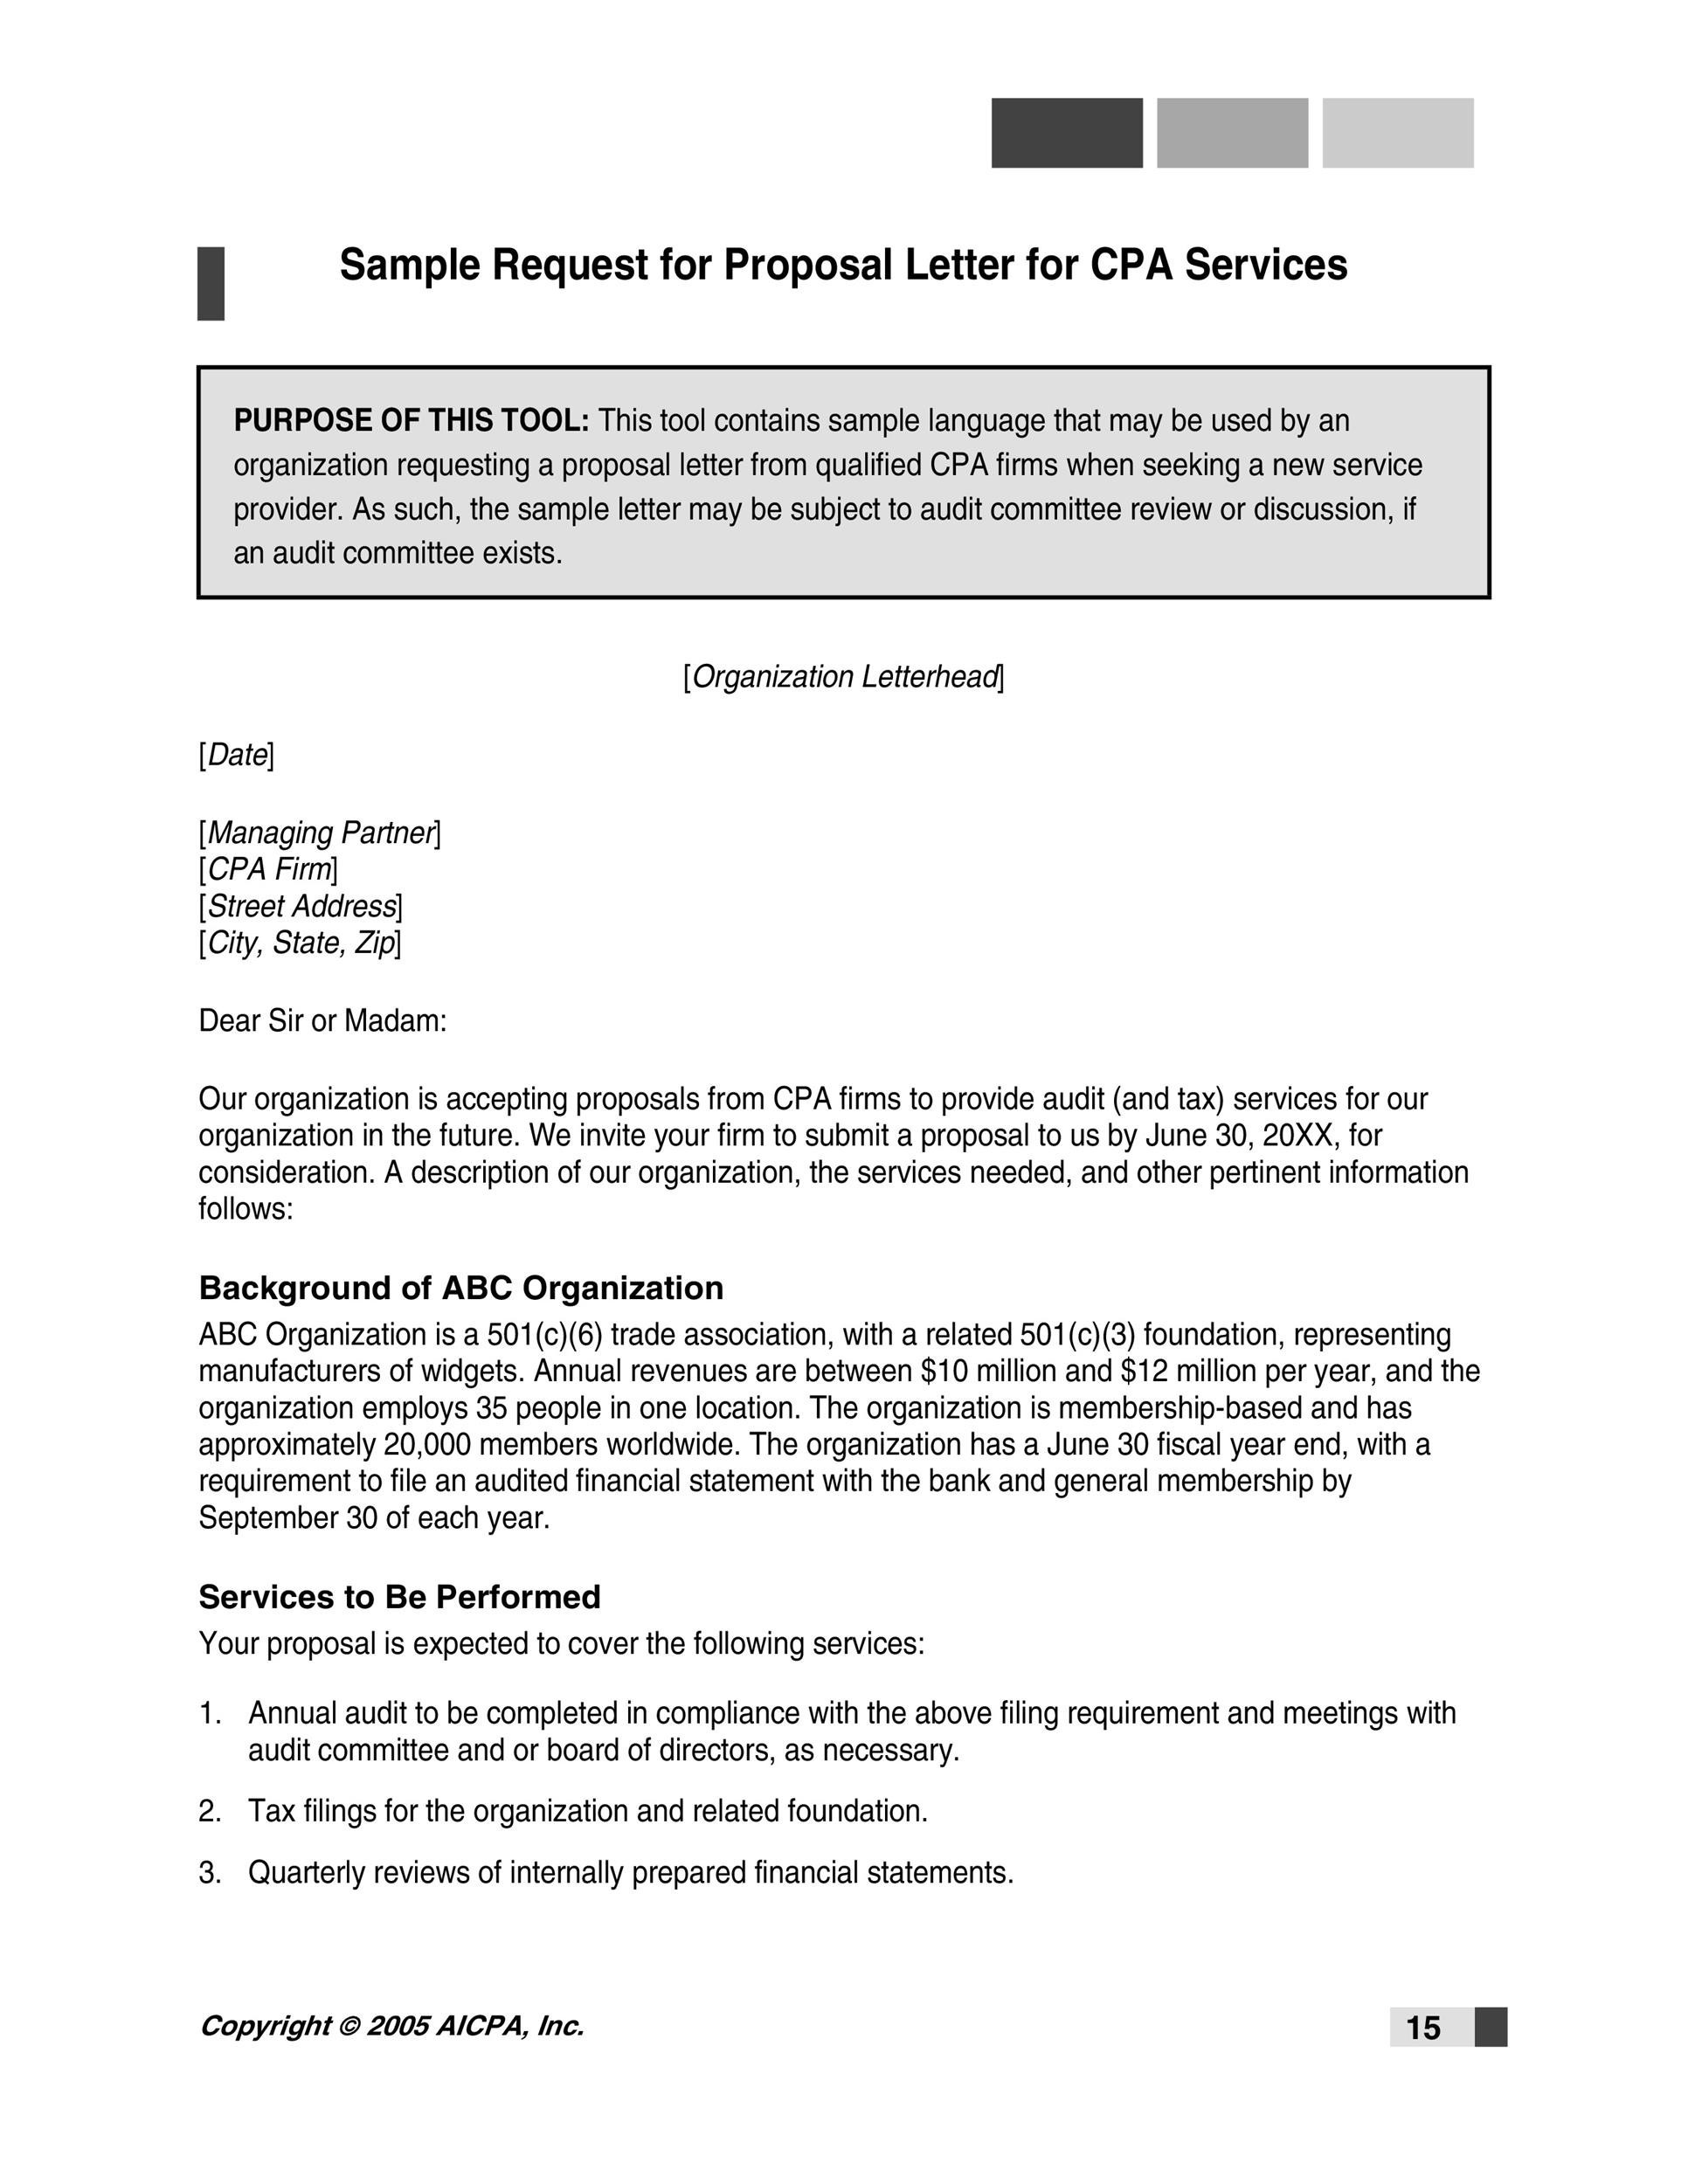 Sample Business Proposal Letter For Services from templatelab.com